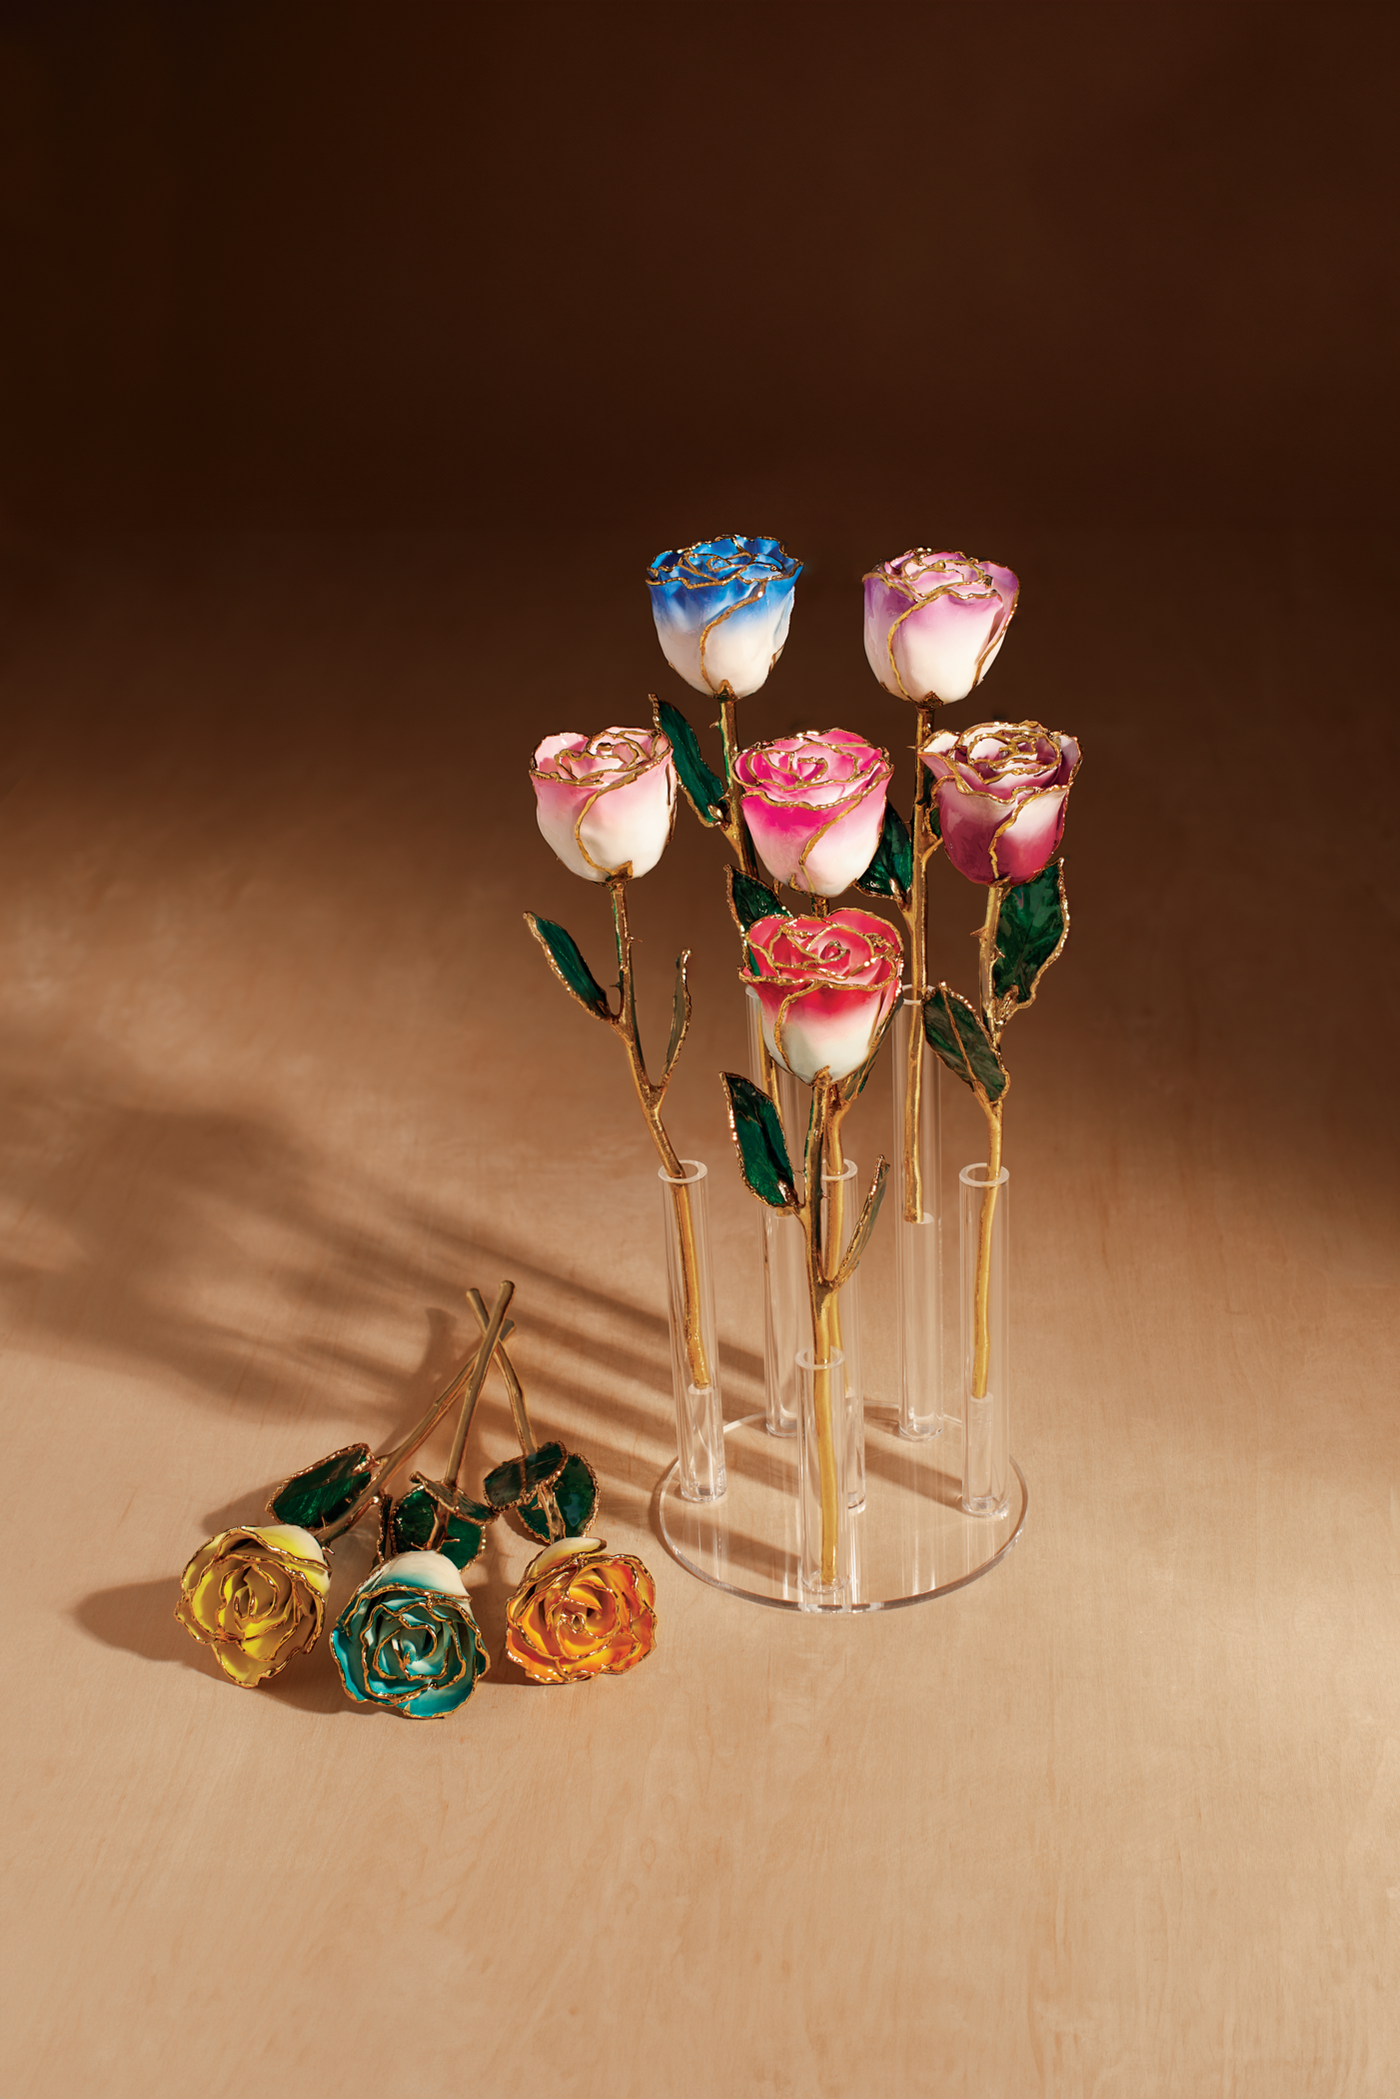 A selection of Everlasting Roses, showcasing an acrylic display stand holding 6 flowers hand painted with 24K gold trim.